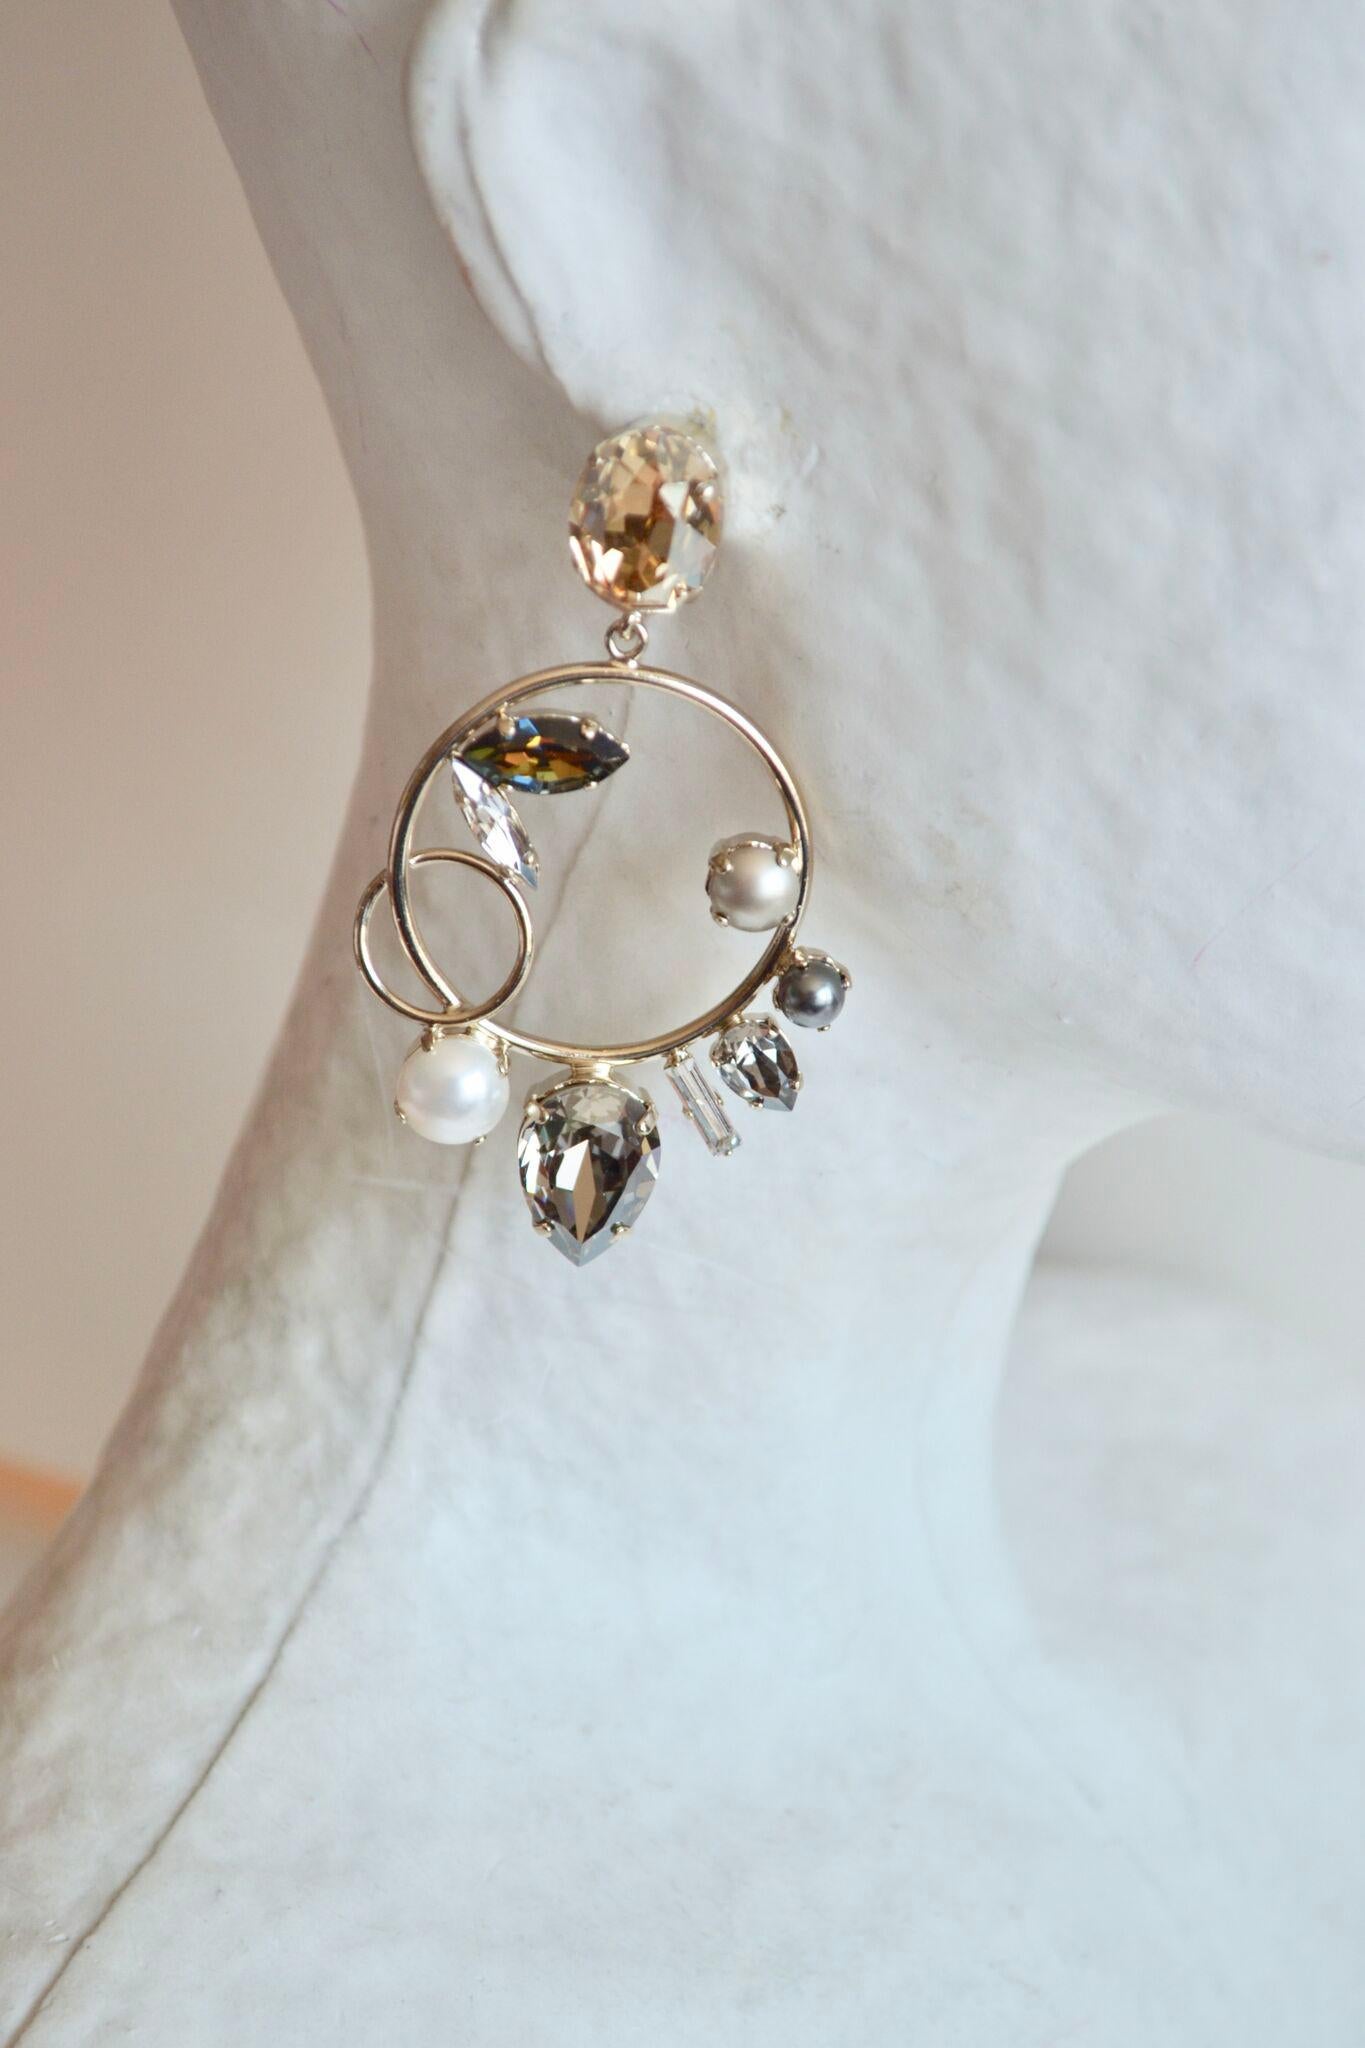 Champagne crystal topped clip earrings with circle drop adorned further with Swarovski crystals and glass pearls. Made by French designer Philippe Ferrandis. 